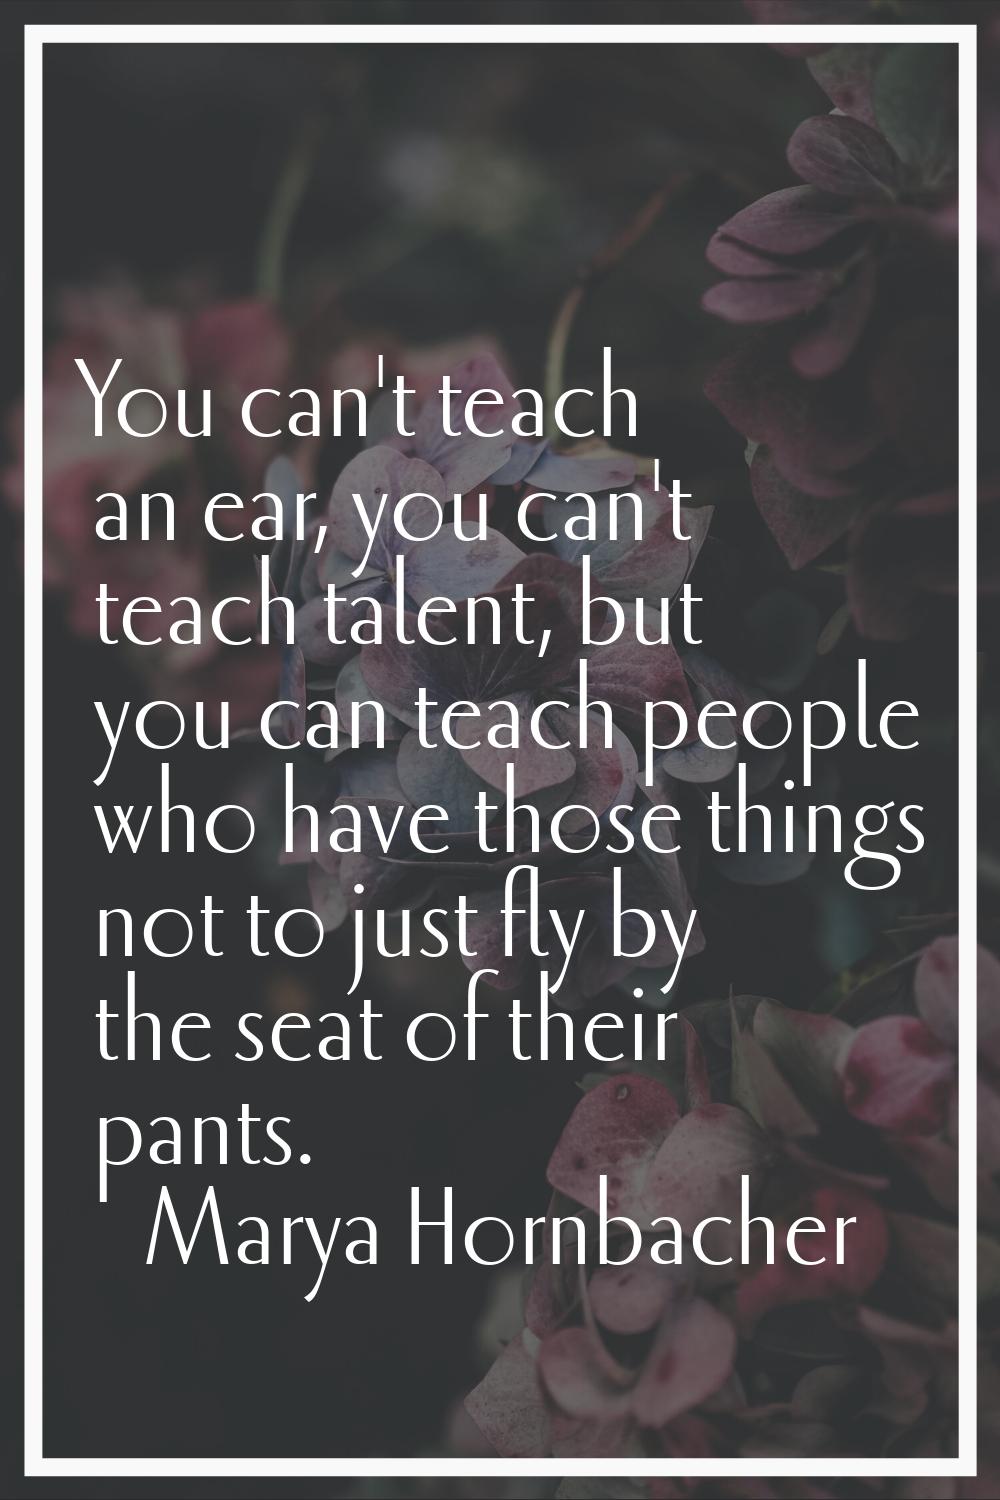 You can't teach an ear, you can't teach talent, but you can teach people who have those things not 